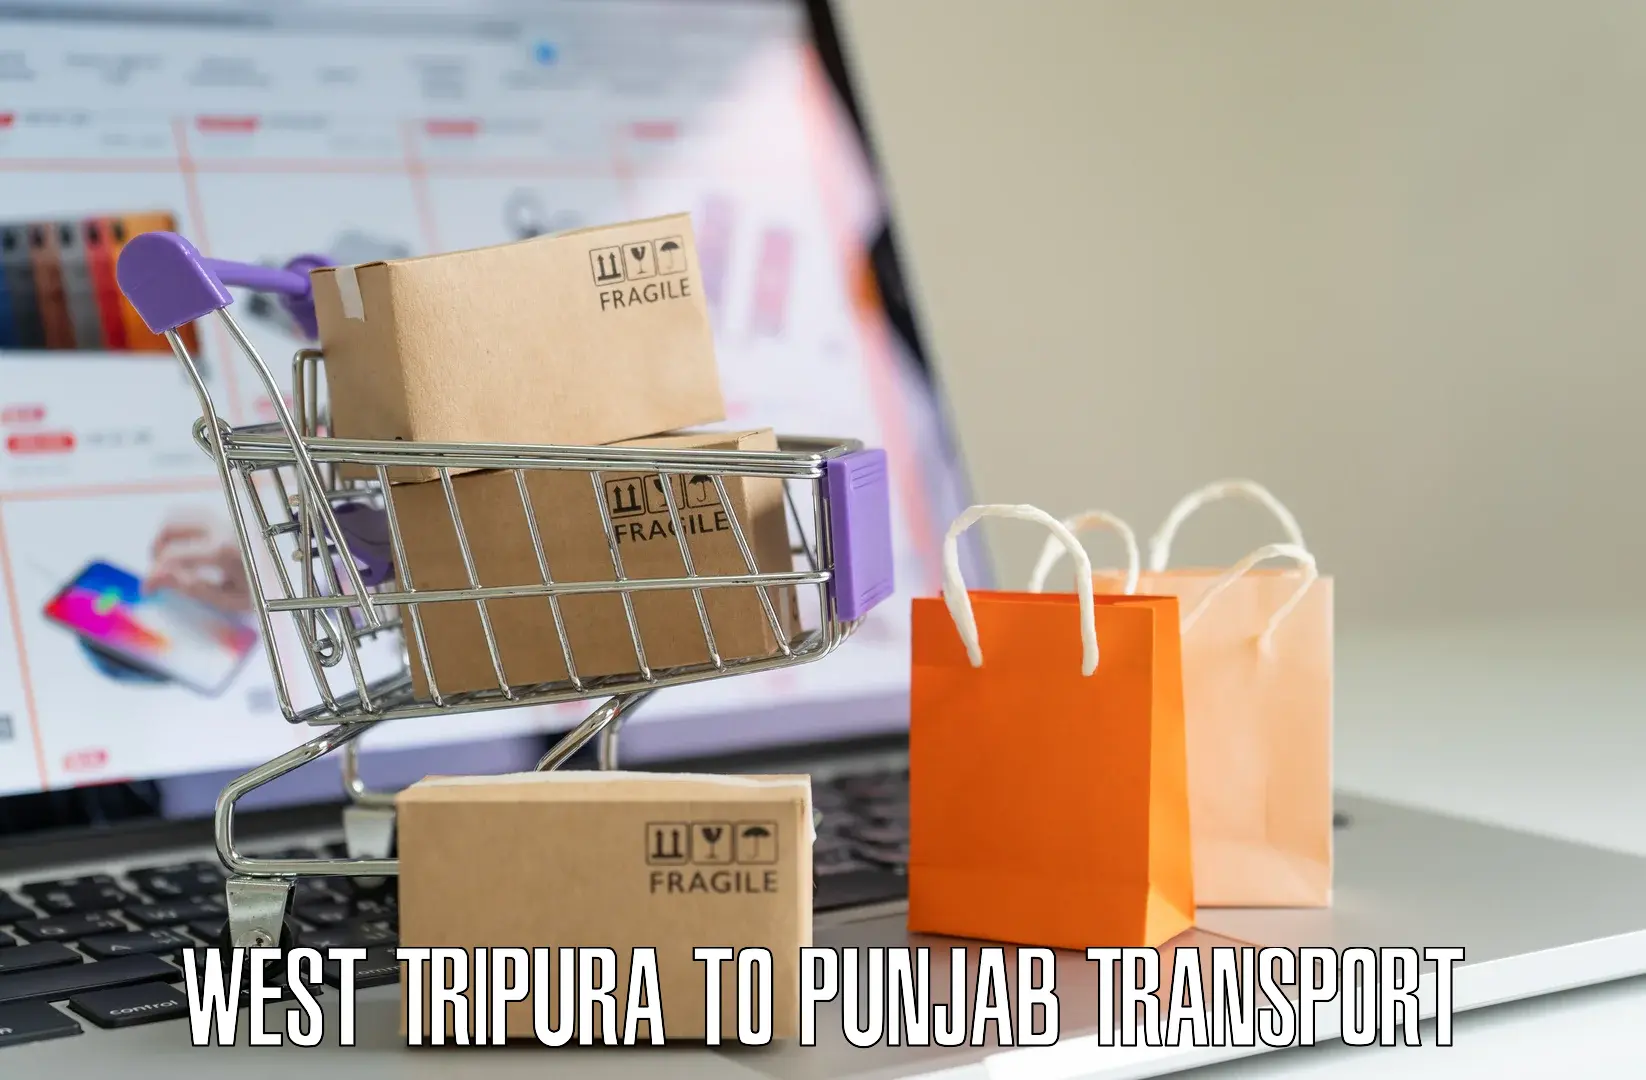 Vehicle courier services West Tripura to Batala